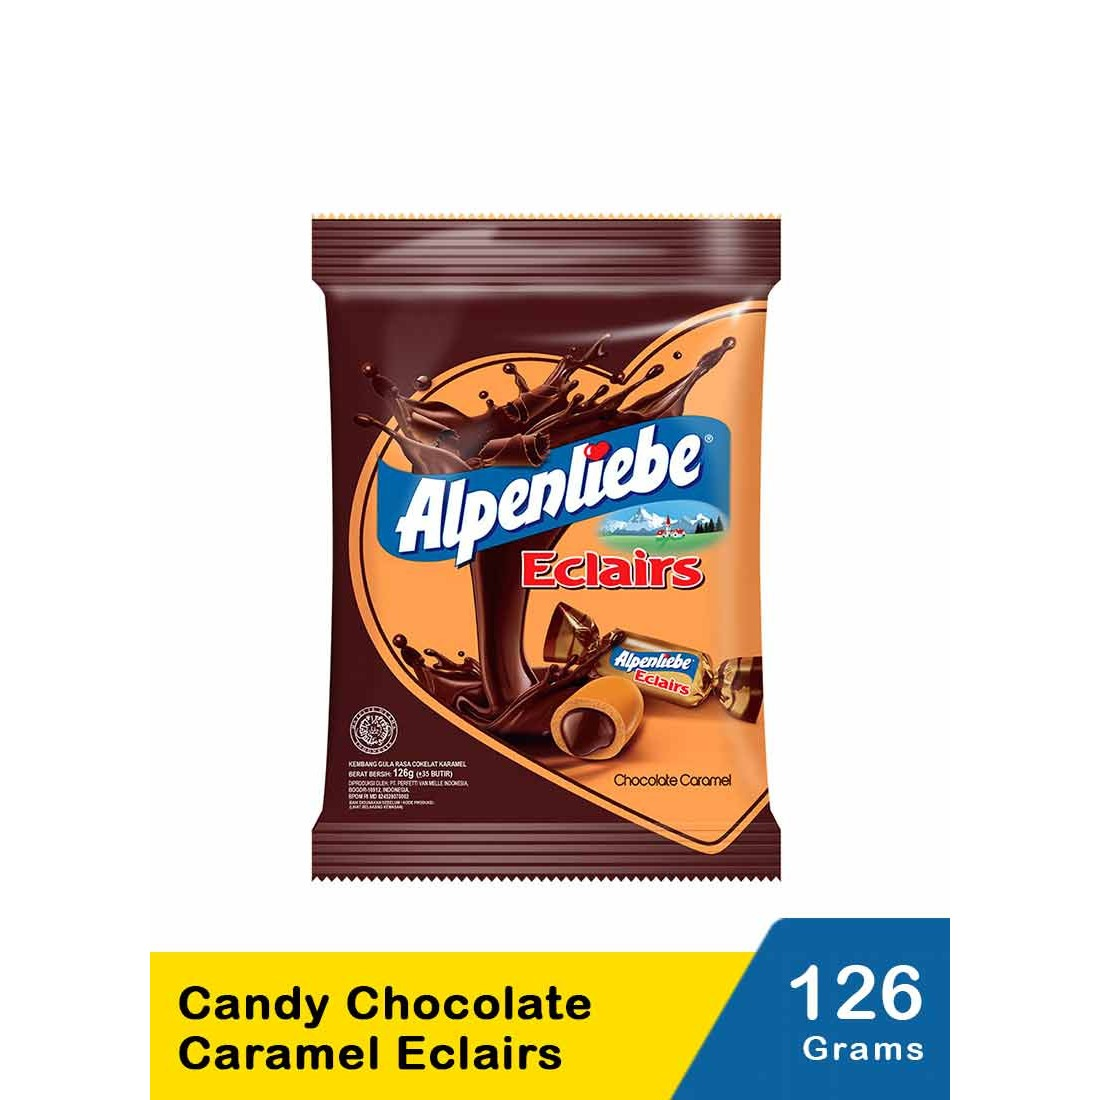 Alpenliebe 126G Candy Chocolate Caramel Eclairs